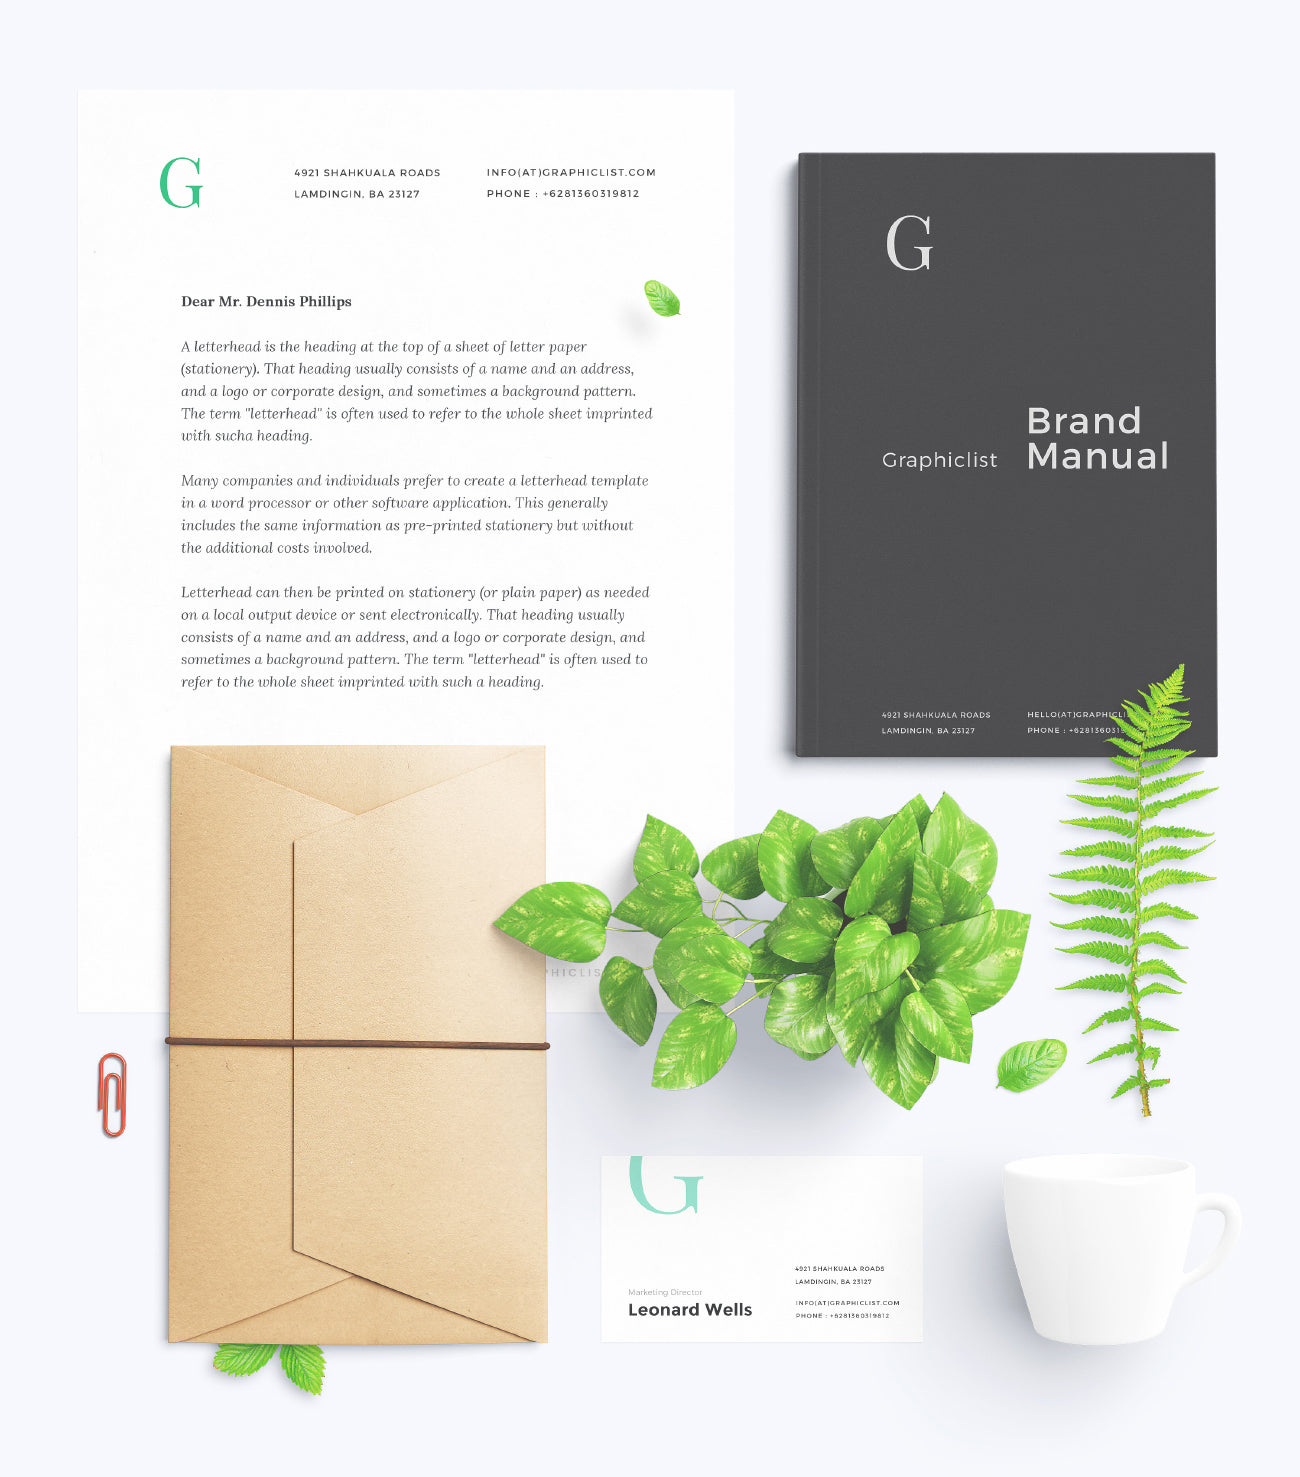 Free Spring Vibed Green Business Stationery and Branding Mockup Toolkit